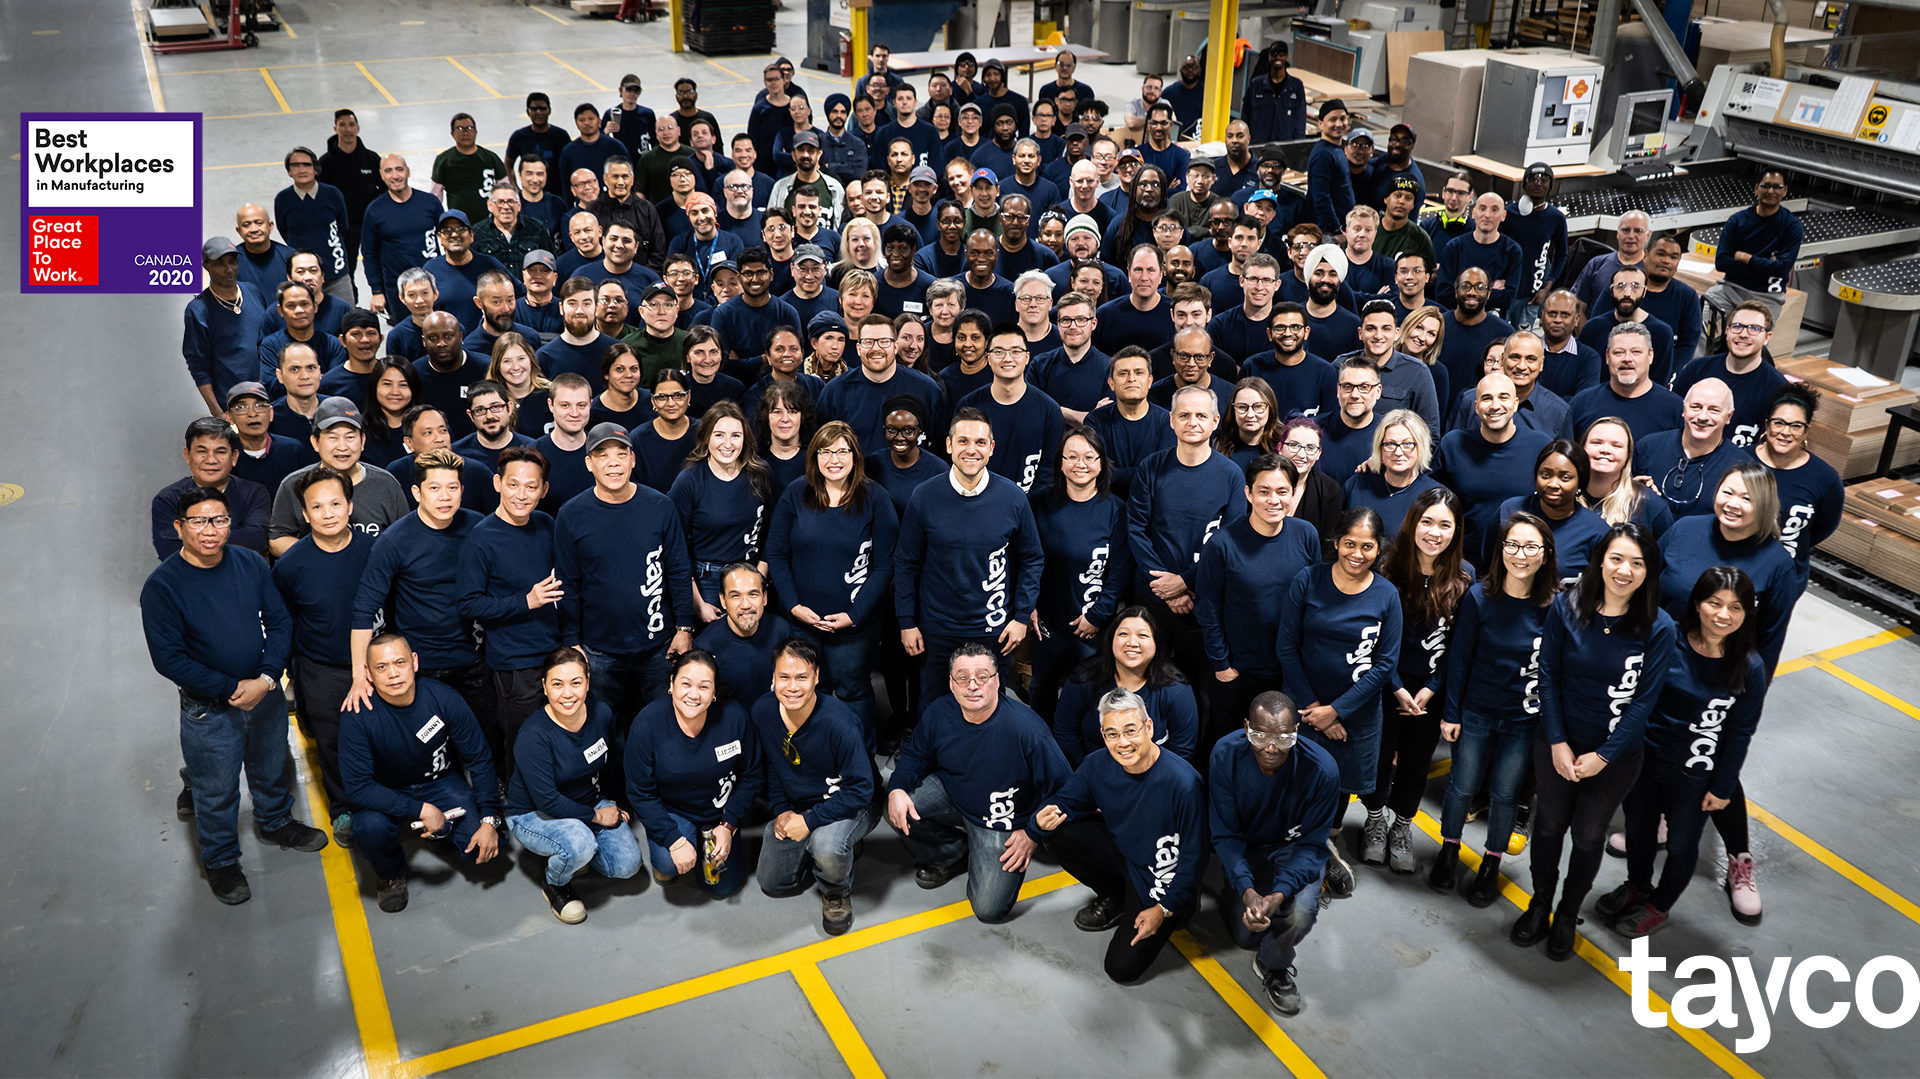 <h1>Tayco is one of Canada's Best Workplaces in Manufacturing!</h1>